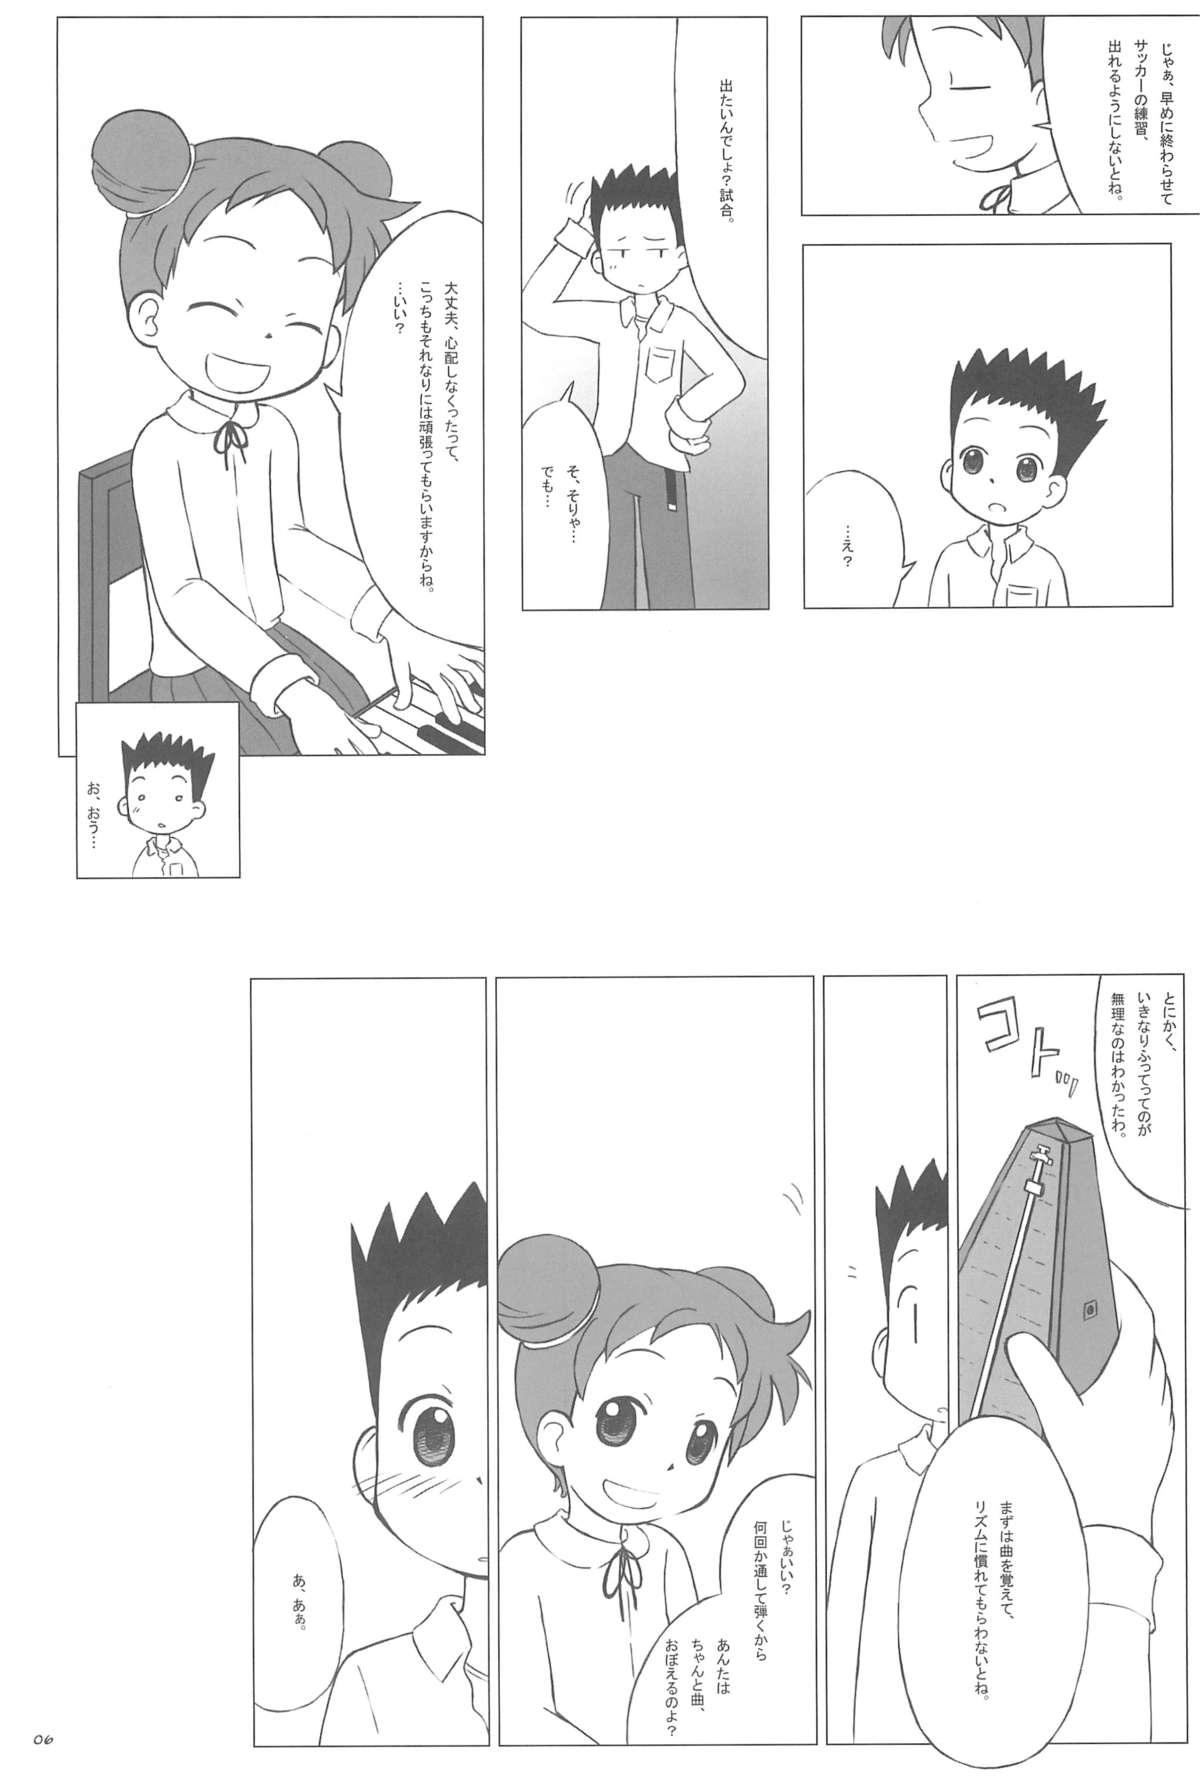 Dick Suckers Ostwind - Ojamajo doremi Facefuck - Page 6